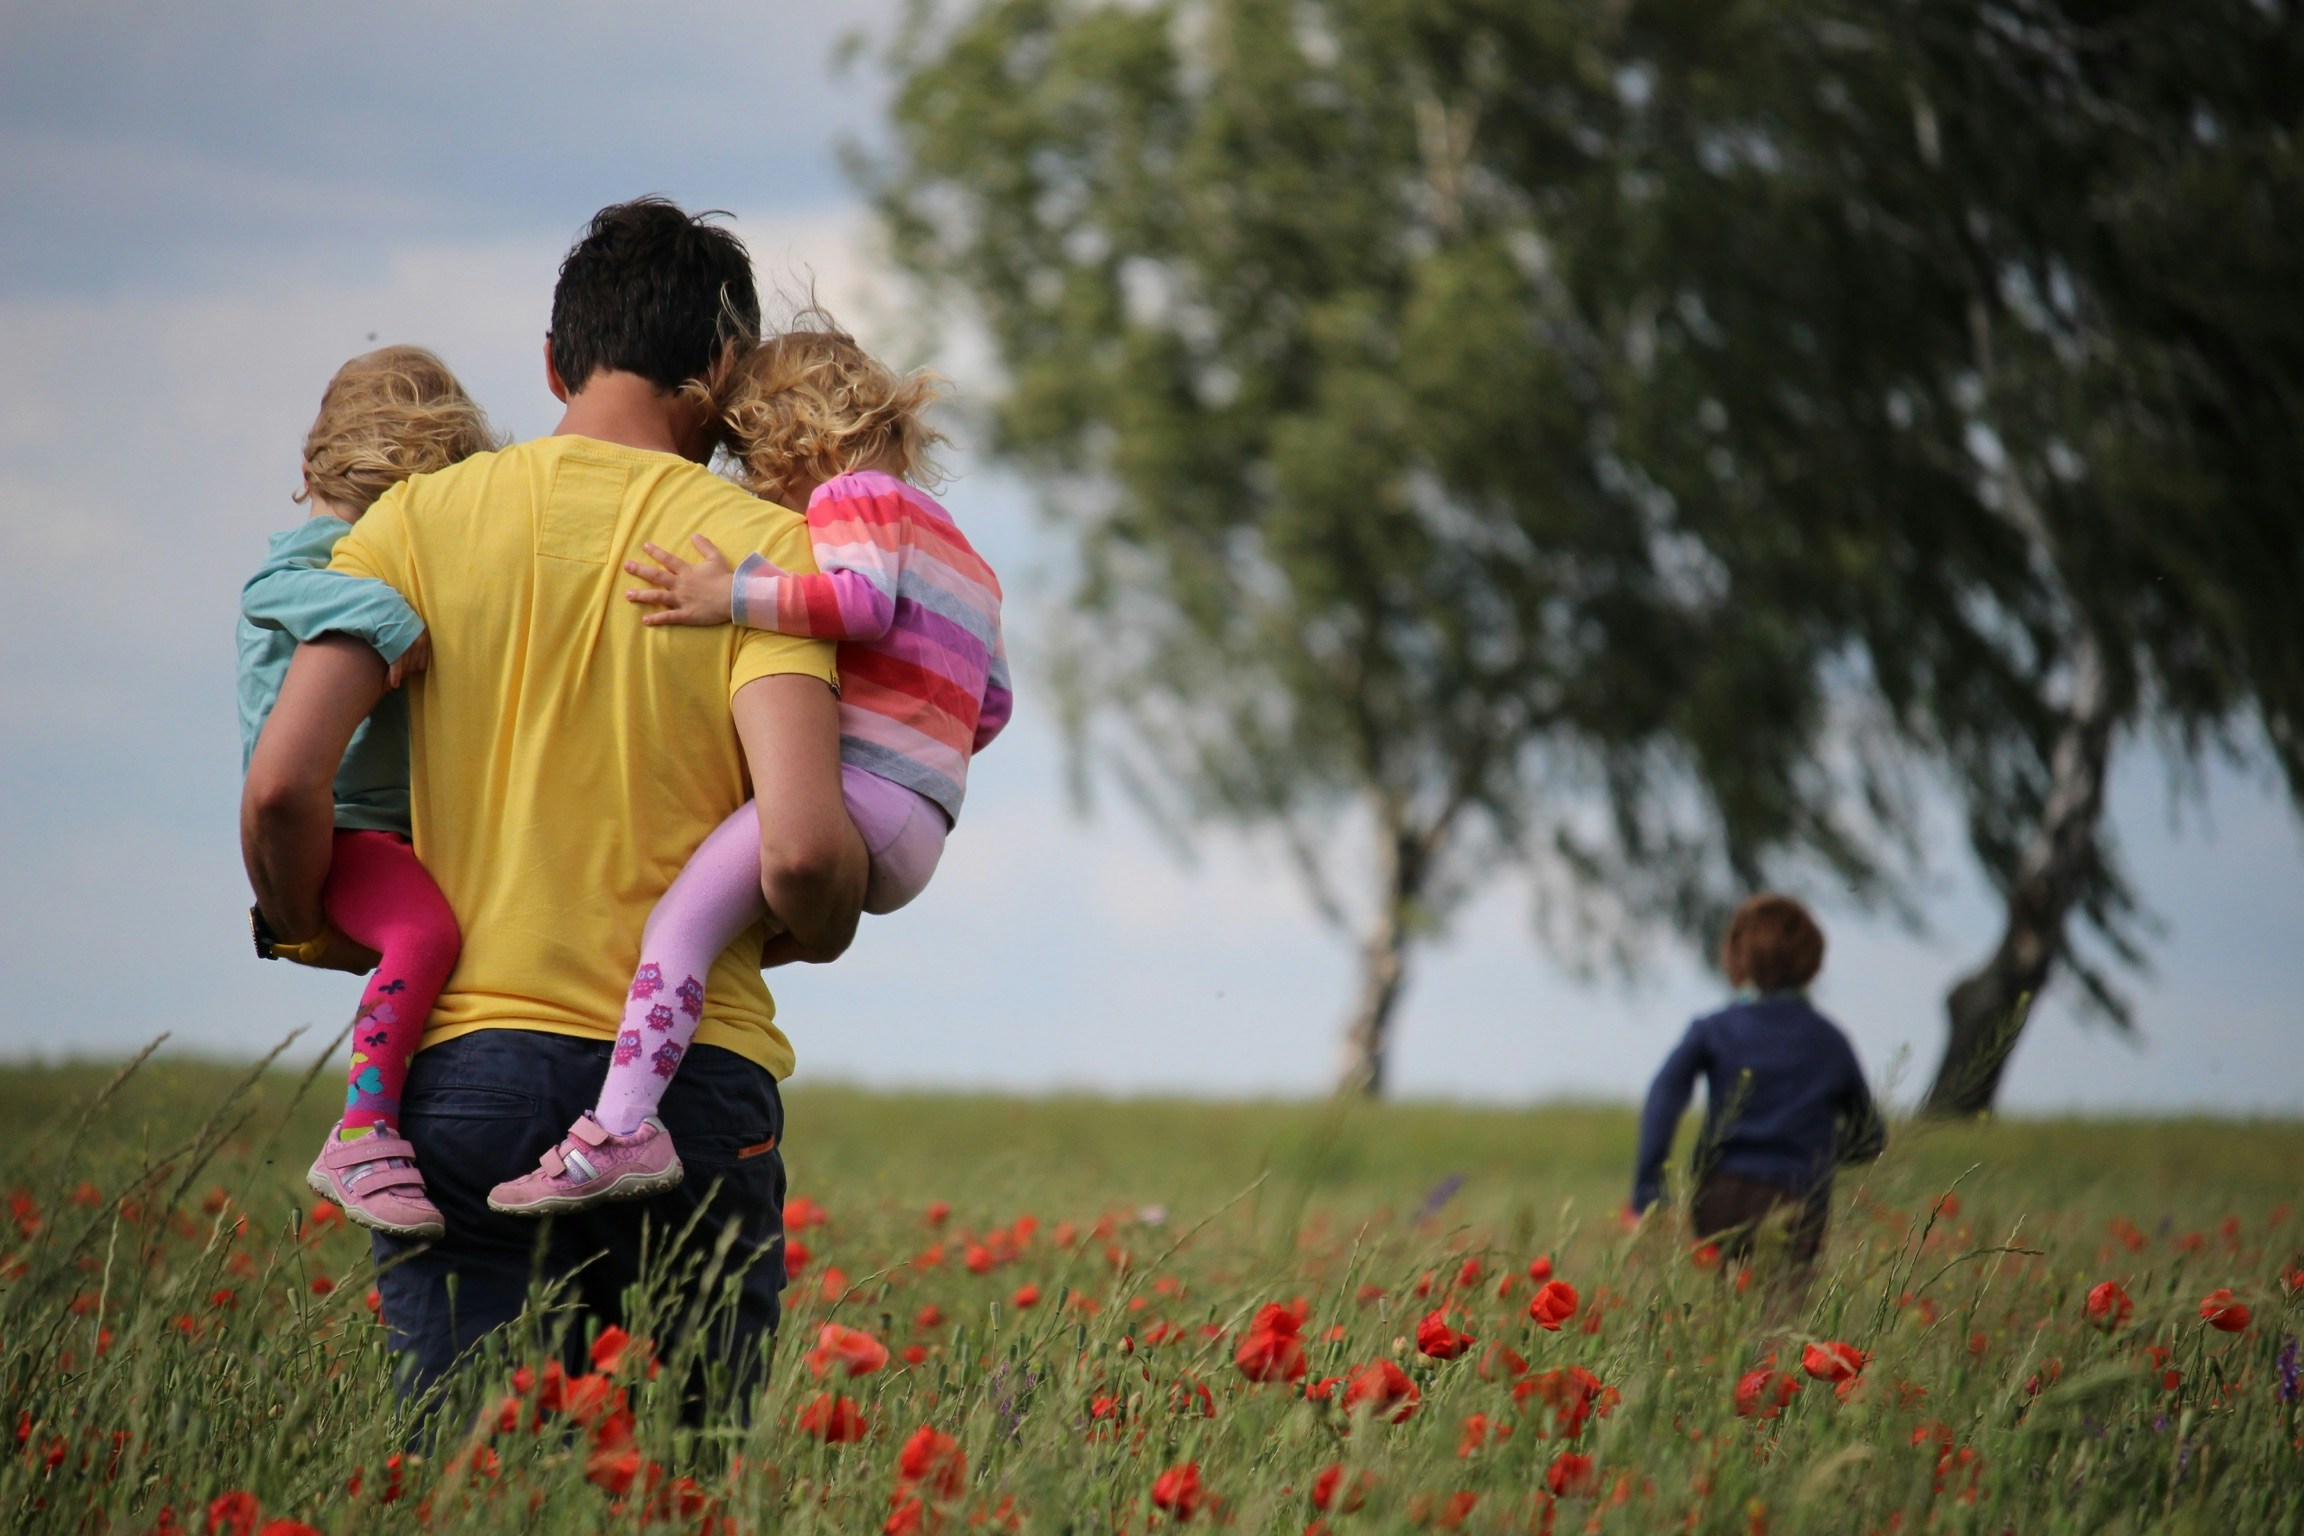 A dad is seen carrying two of his kids and walking through a field. His third kid is seen running in front of him.